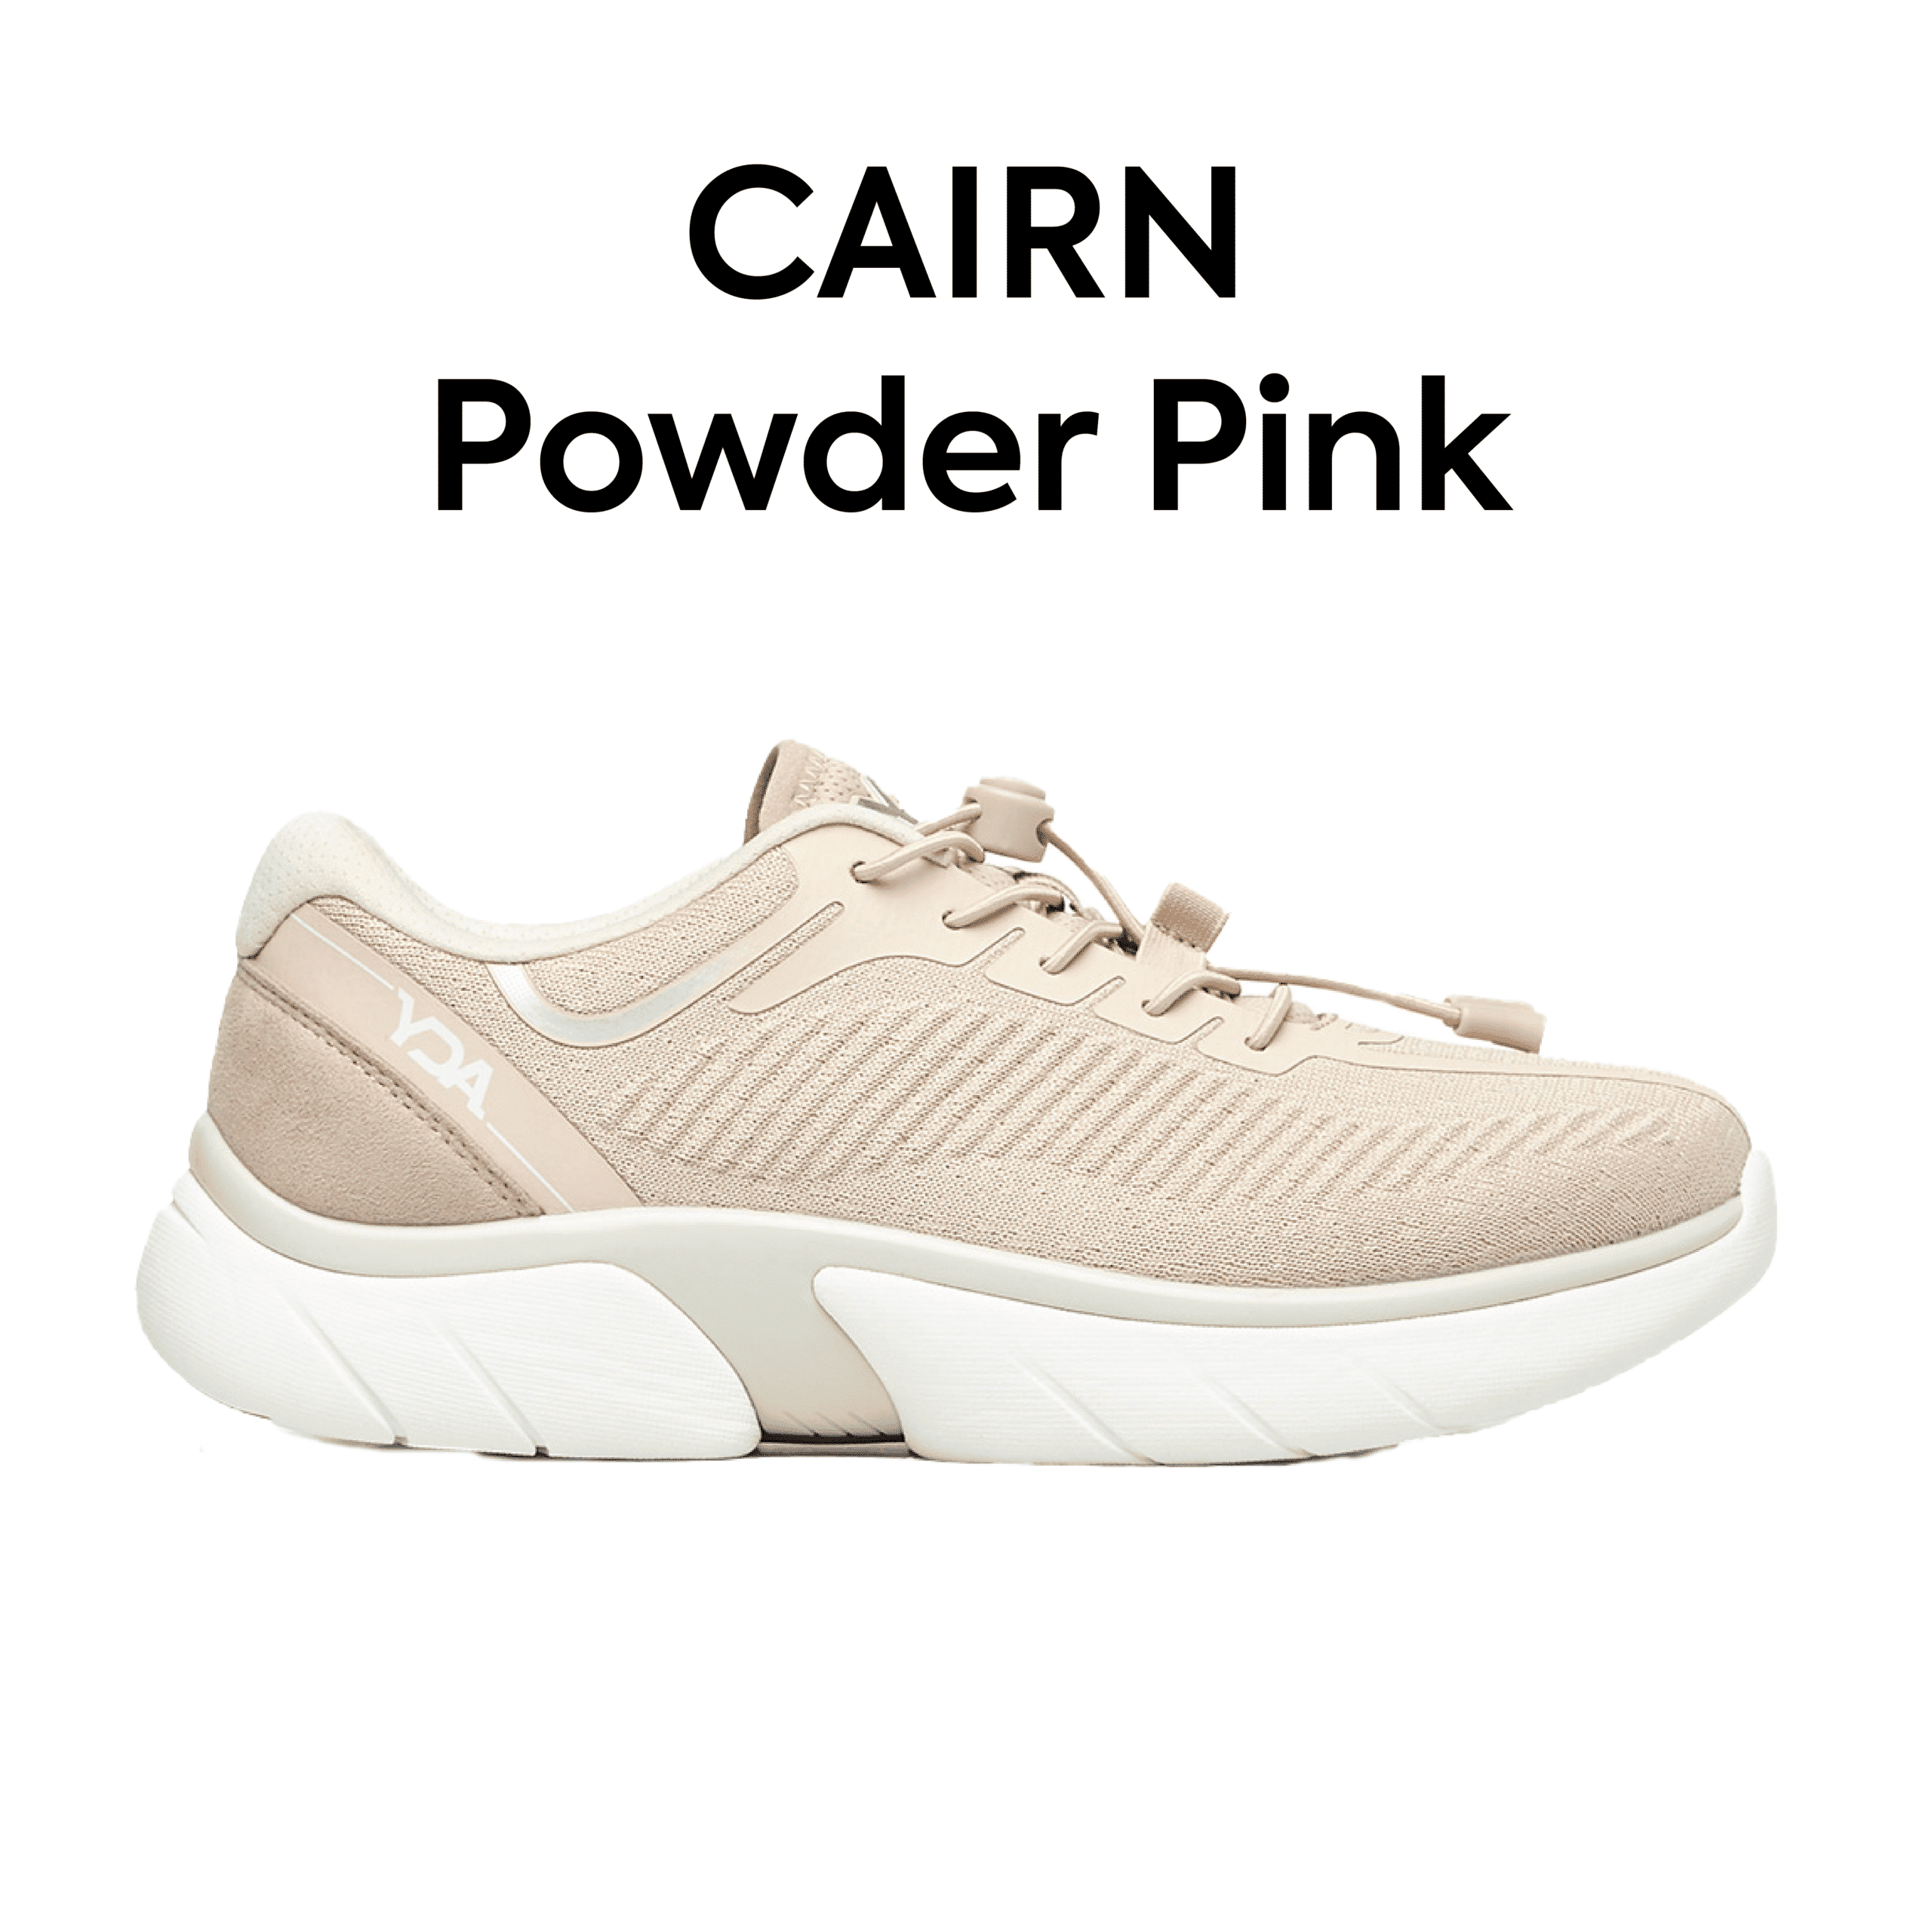 20220401_all YDA shoes_CAIRN Powder Pink